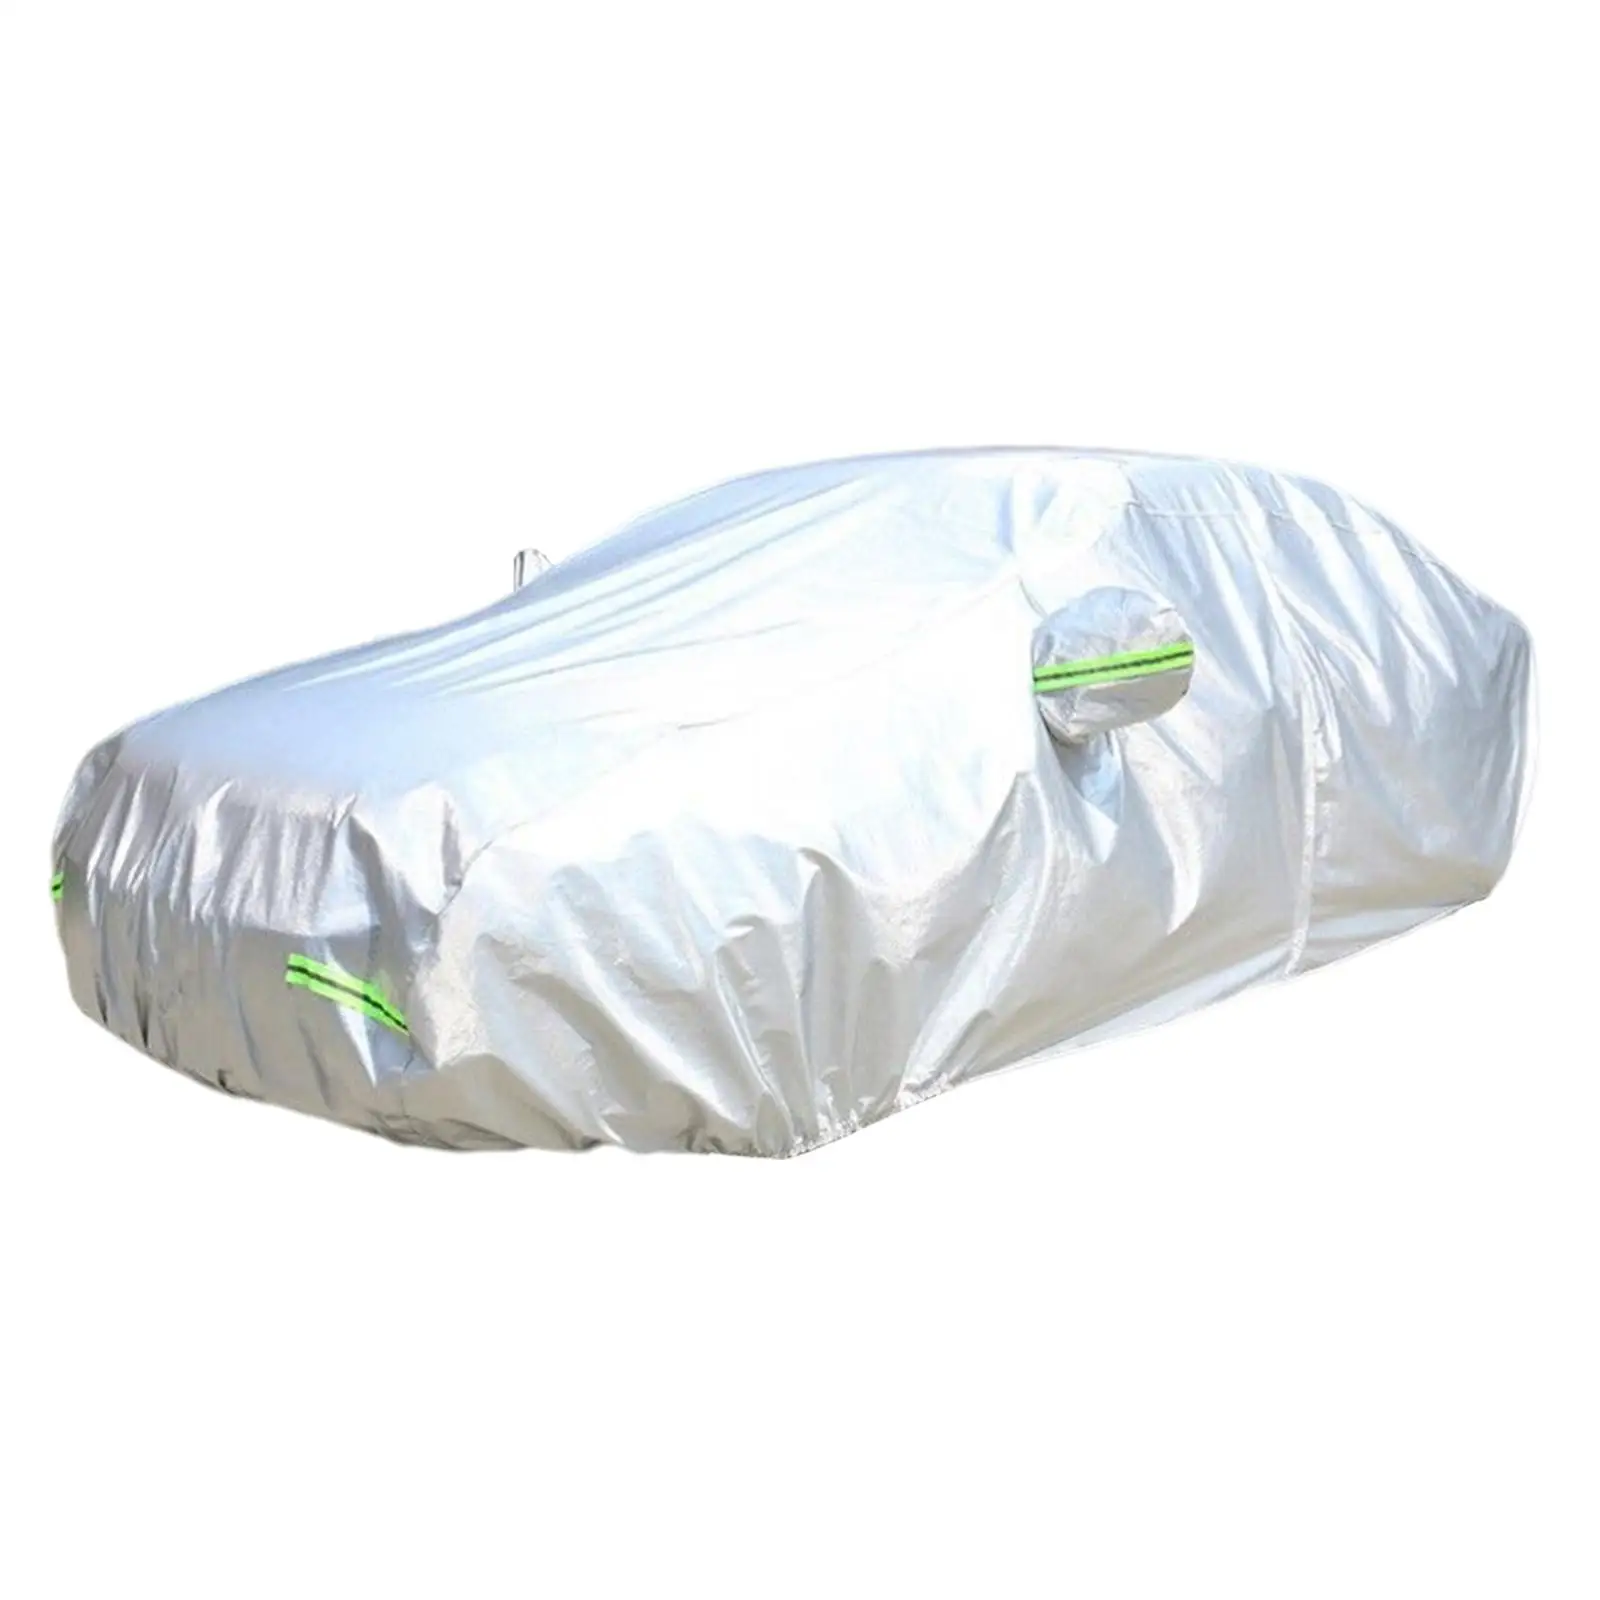 Oxford Cloth Full Car Cover Automobile Exterior Accessories Dustproof Rain Snow Dust Protector for Byd Atto 3 Yuan Plus